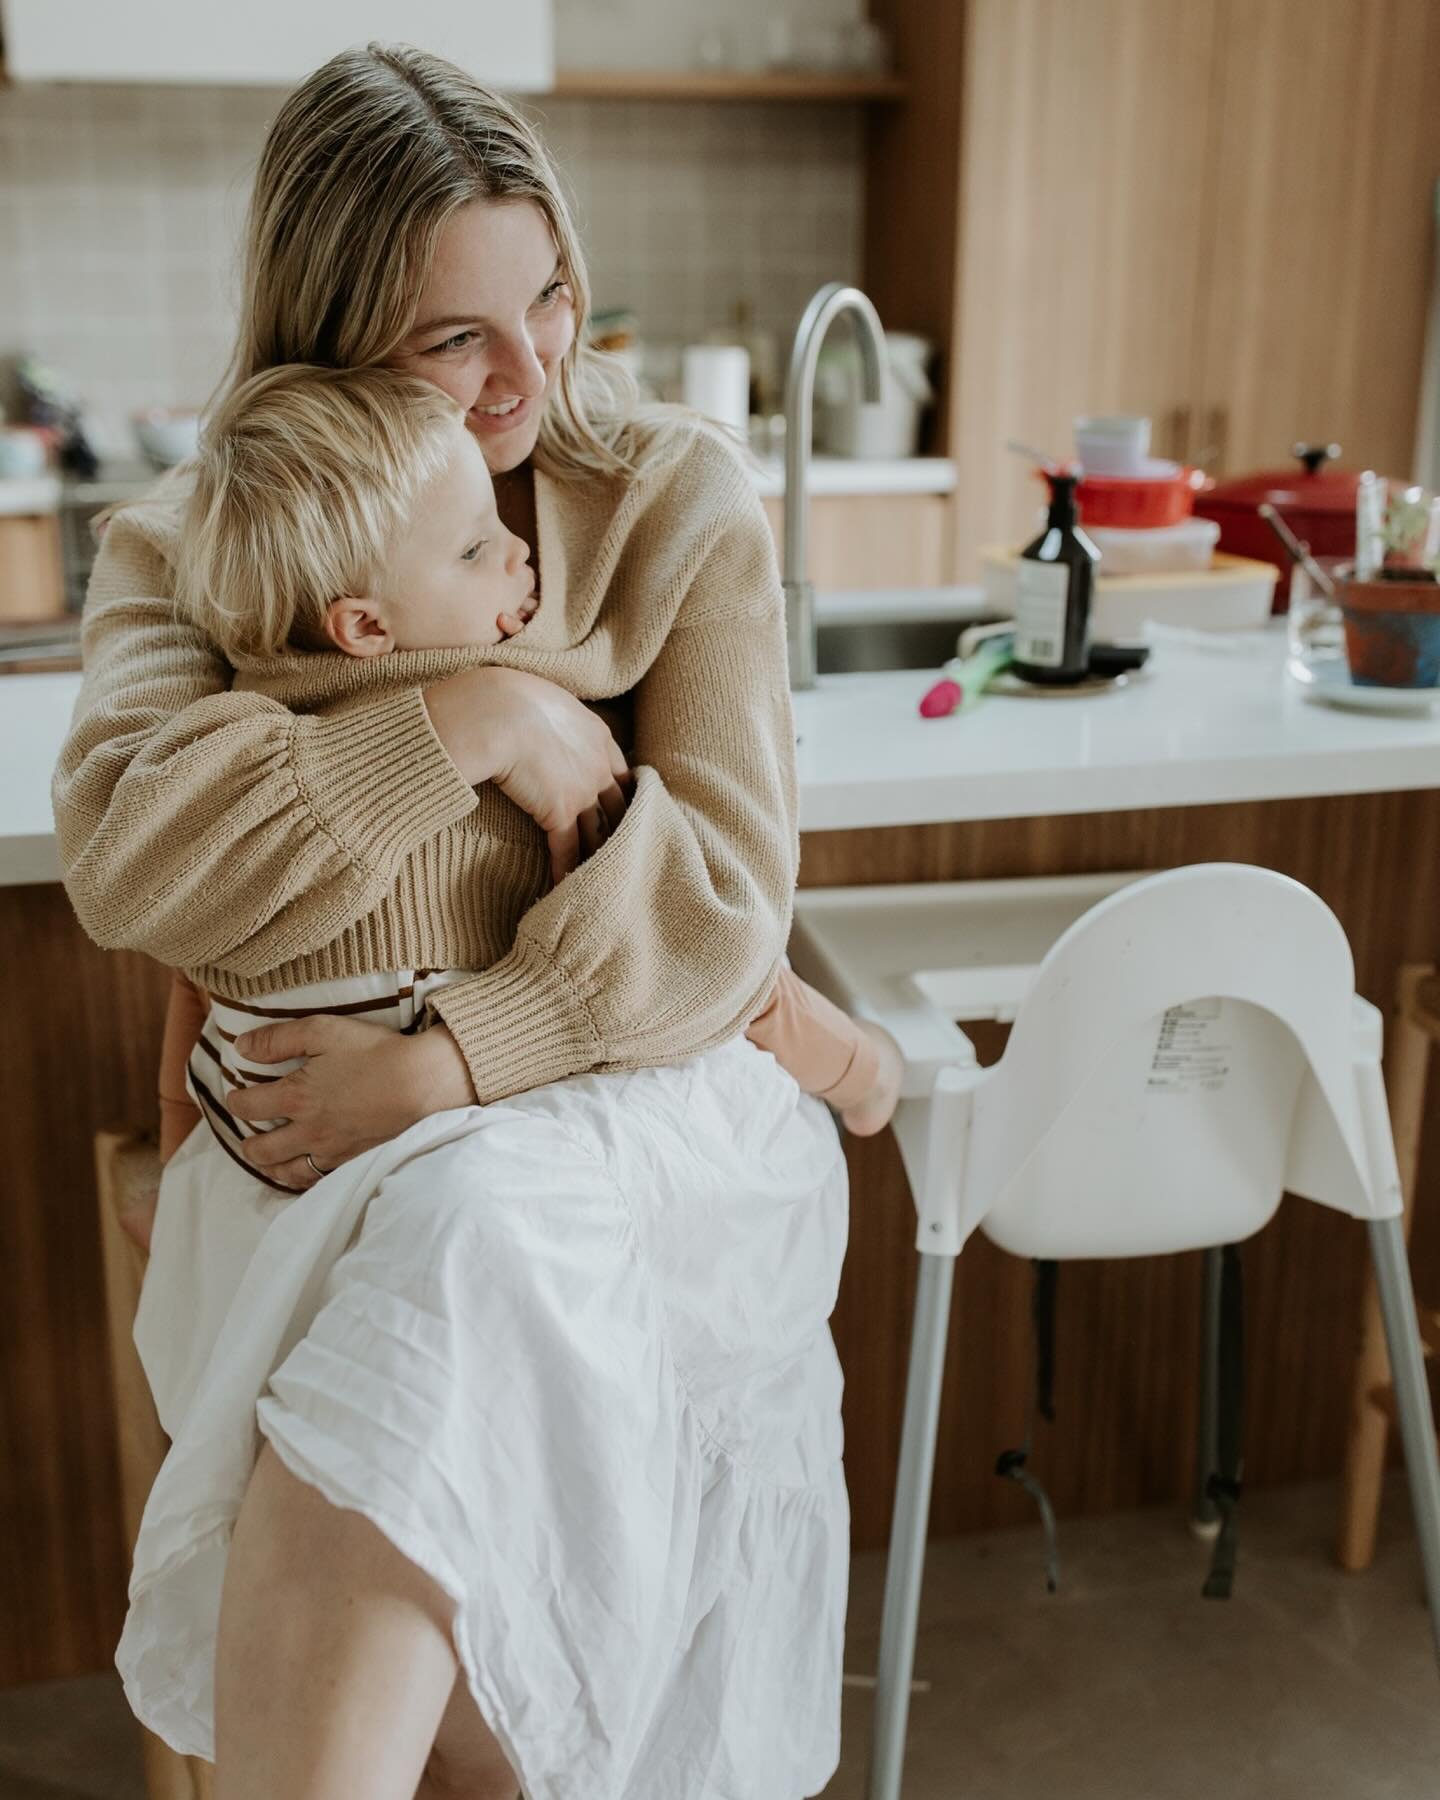 I&rsquo;m so glad I had my big girl camera with me when I visited this gorgeous lady last week. Snapped these beautiful, organic, tender, magical moments! That real, honest mumma-love. Gah, I just love it! 

I&rsquo;ll share more of our fun-filled ar